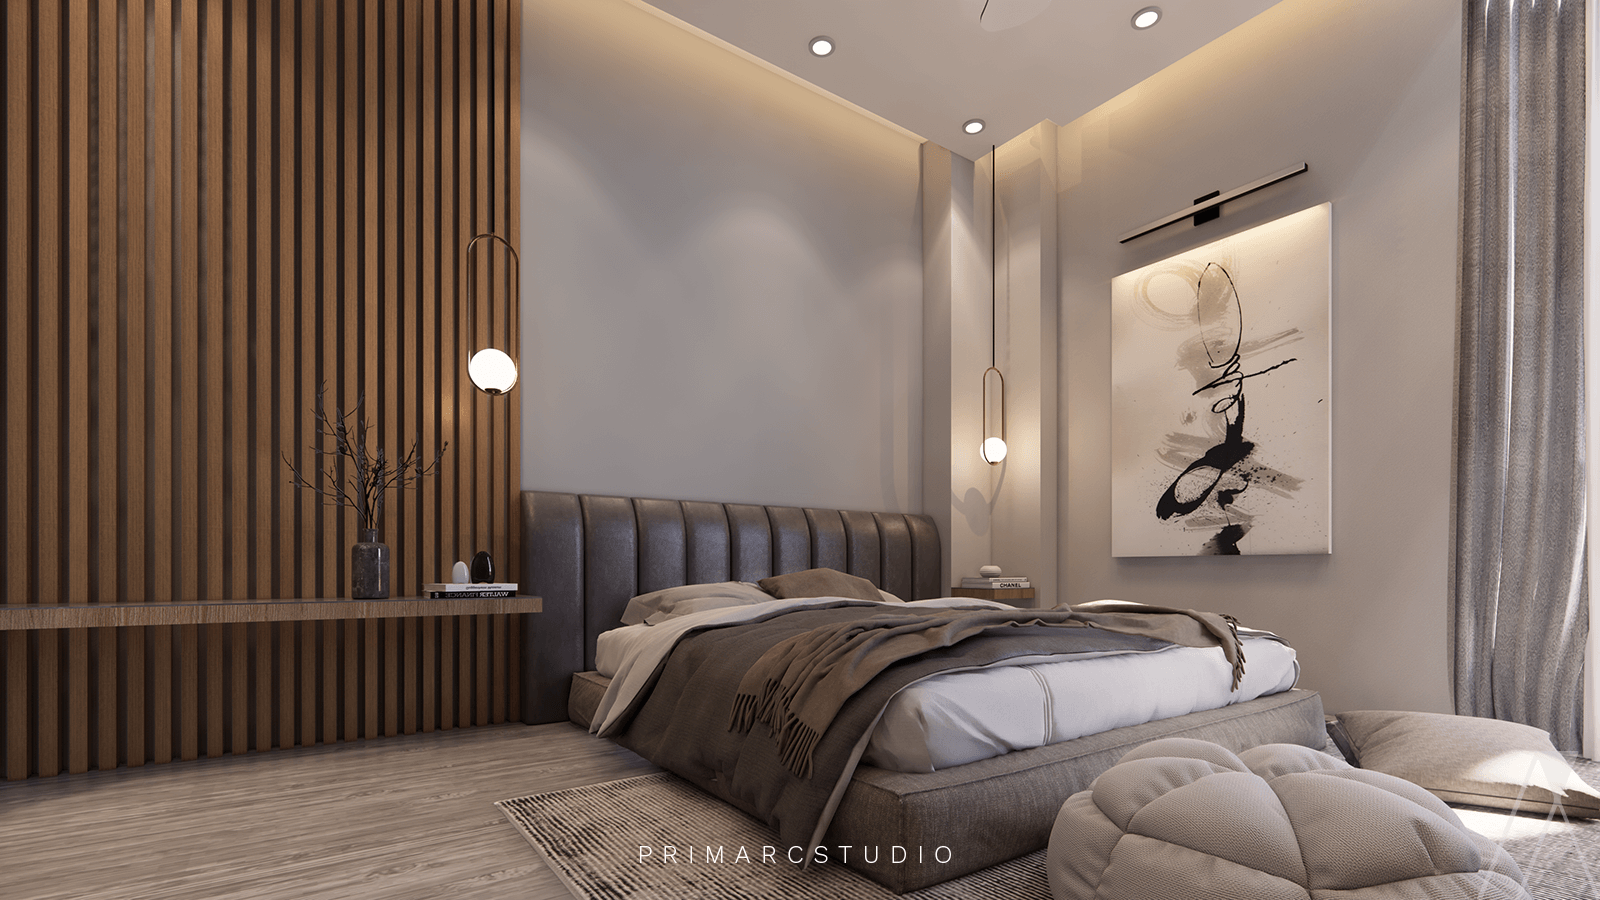 interior design of bedroom with wooden touch and bahaus minimalist feel